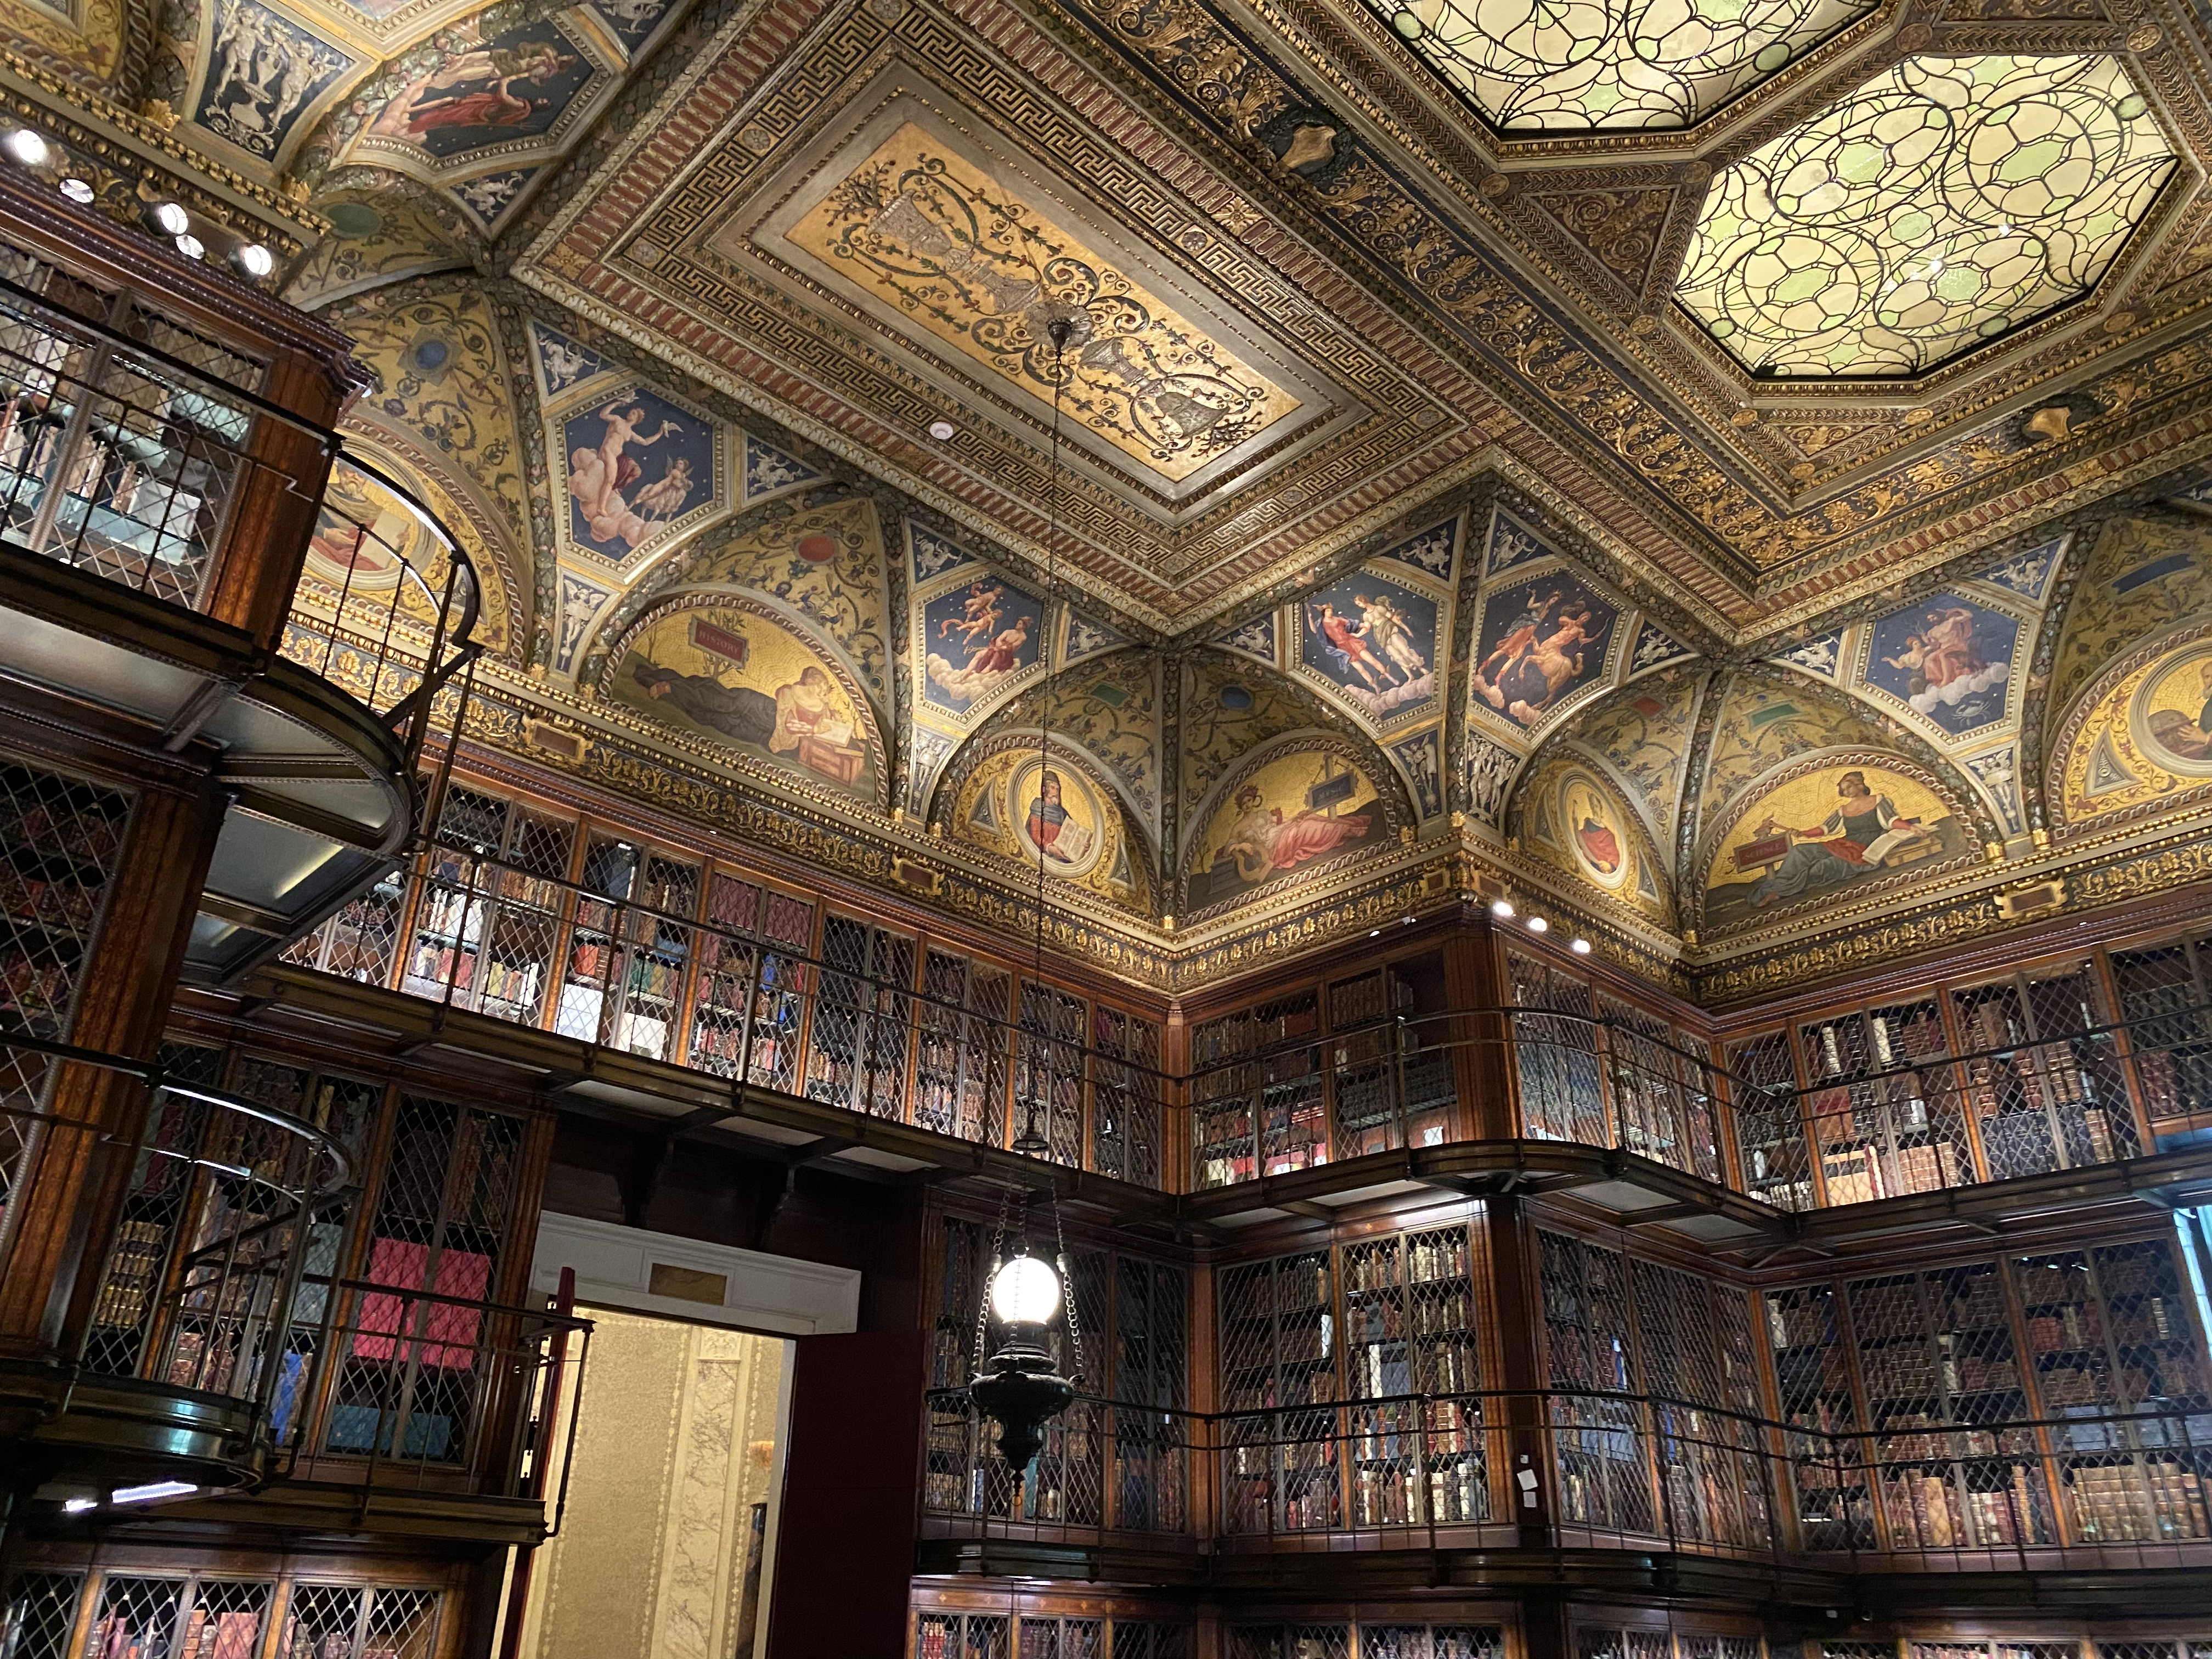 A highly-ornate historic room filled with books in the Morgan Library.